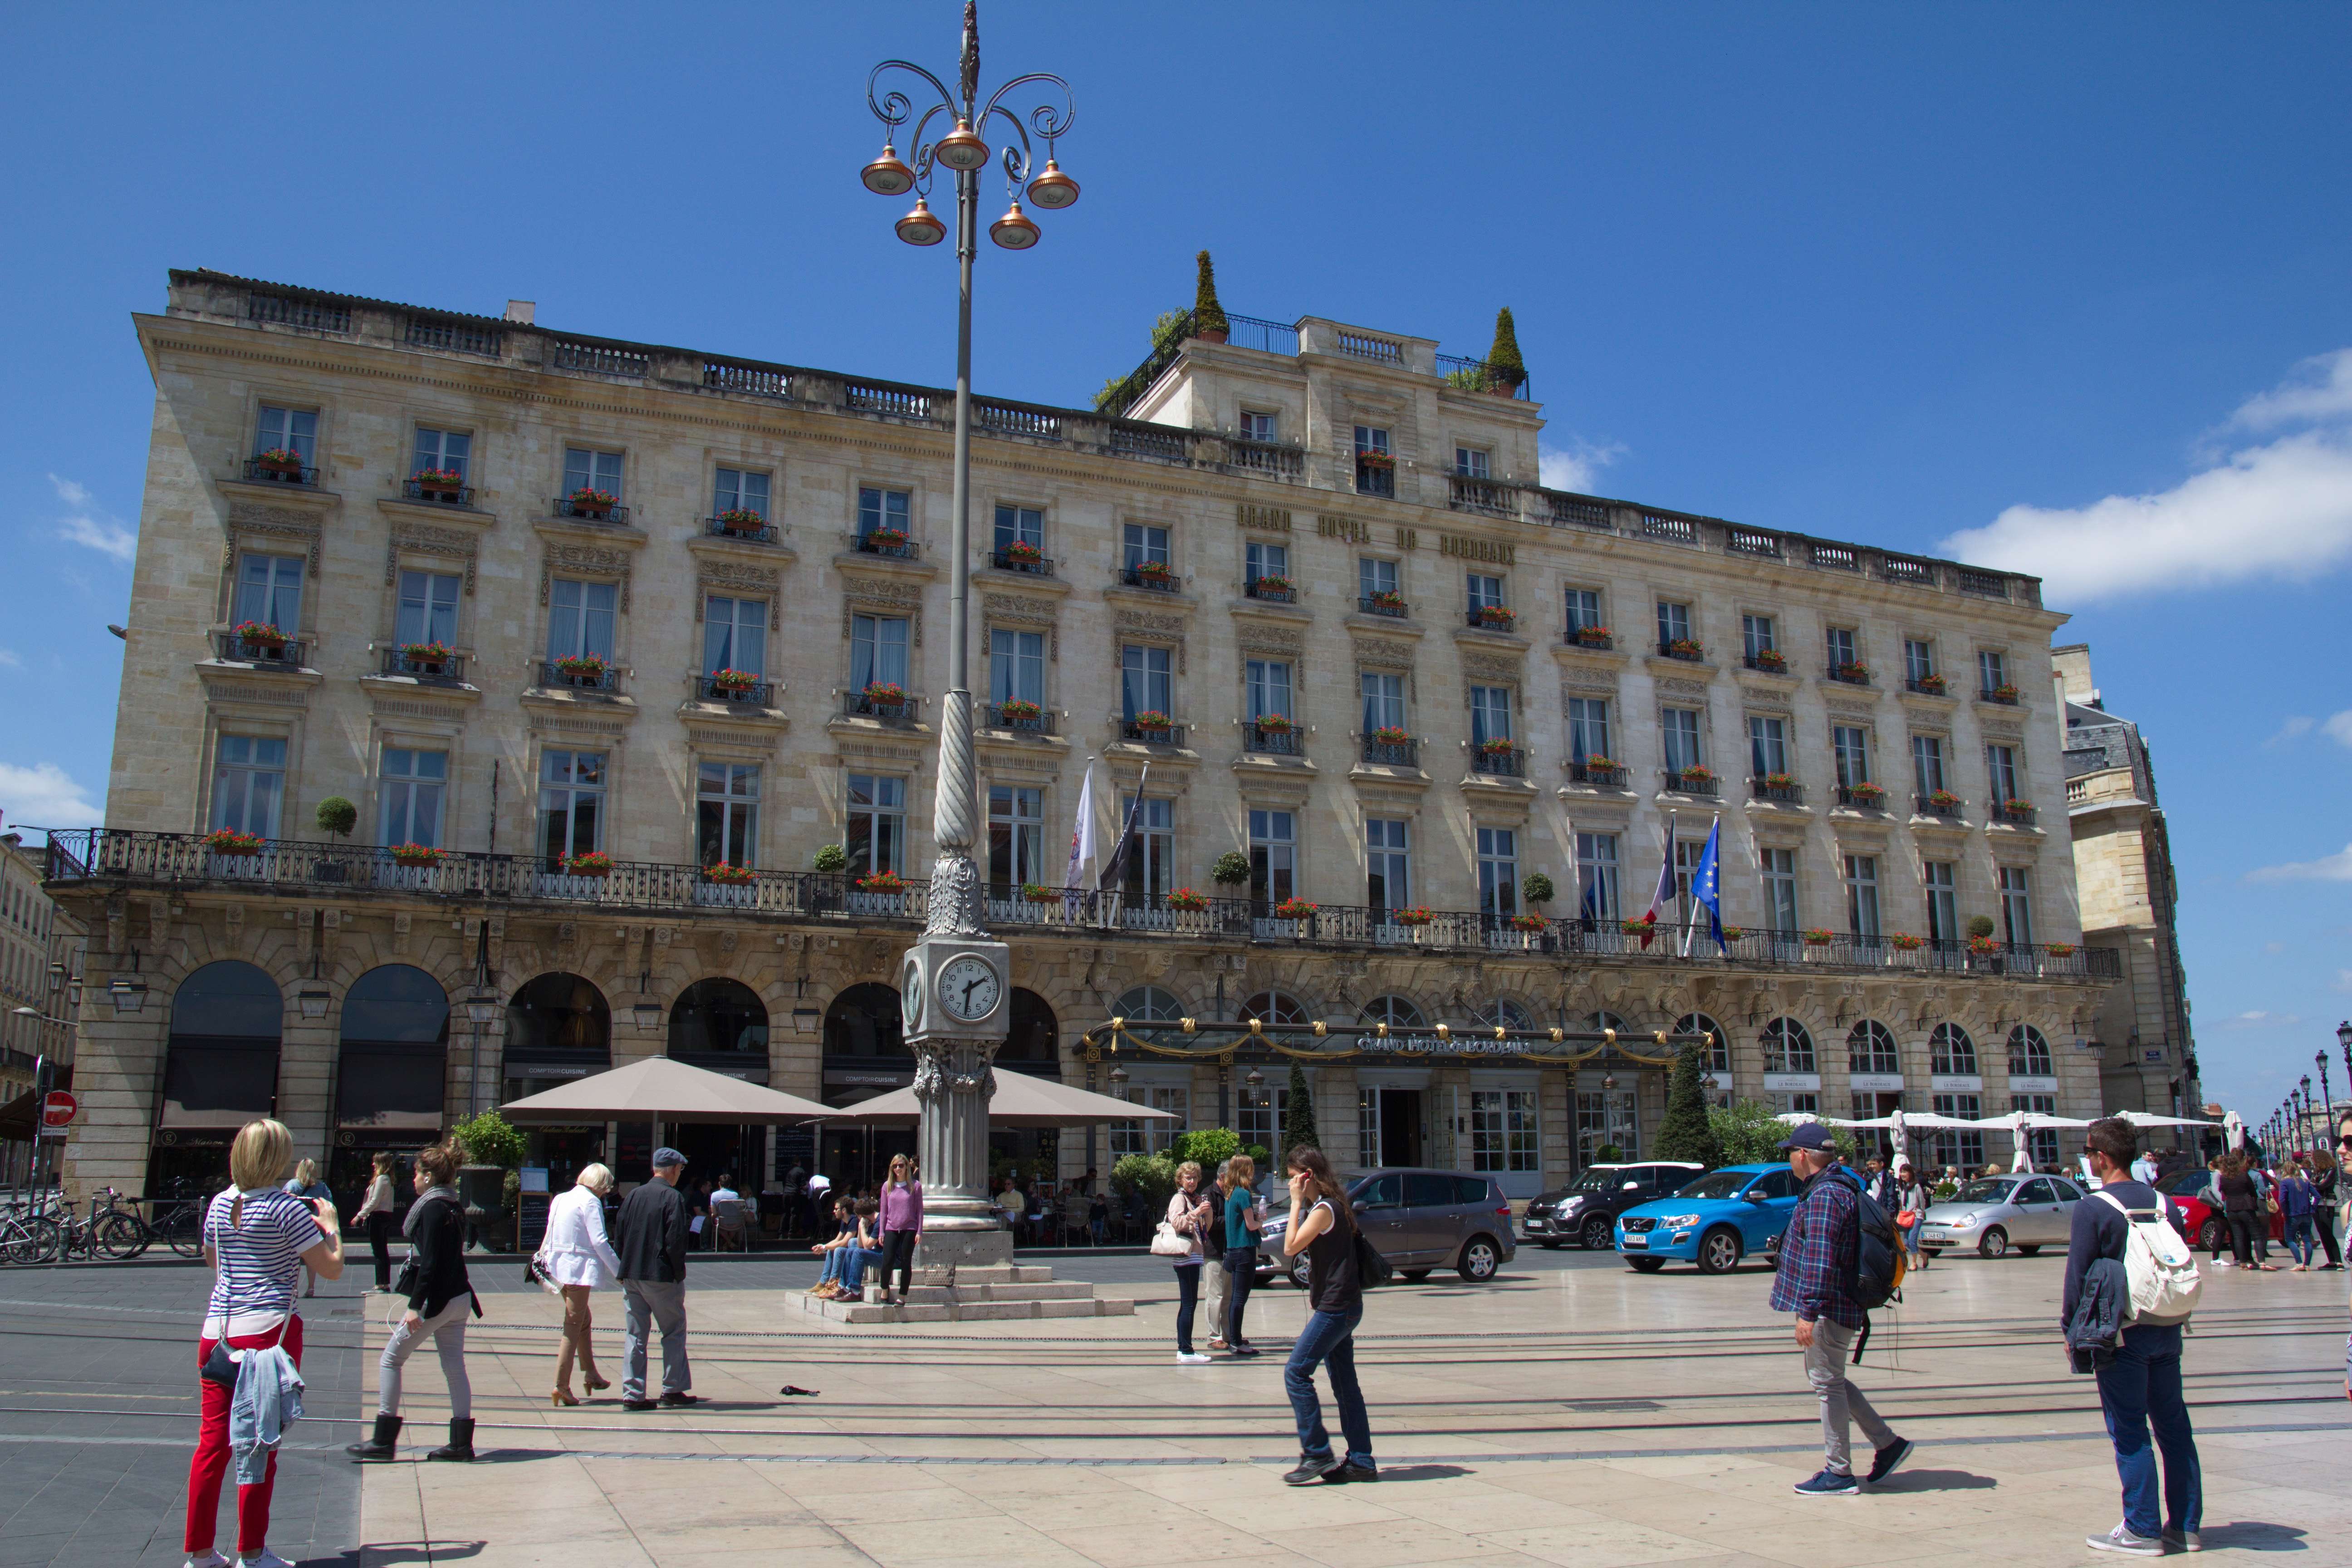 InterContinental Bordeaux – Le Grand Hotel. Picture: Keith Mundy